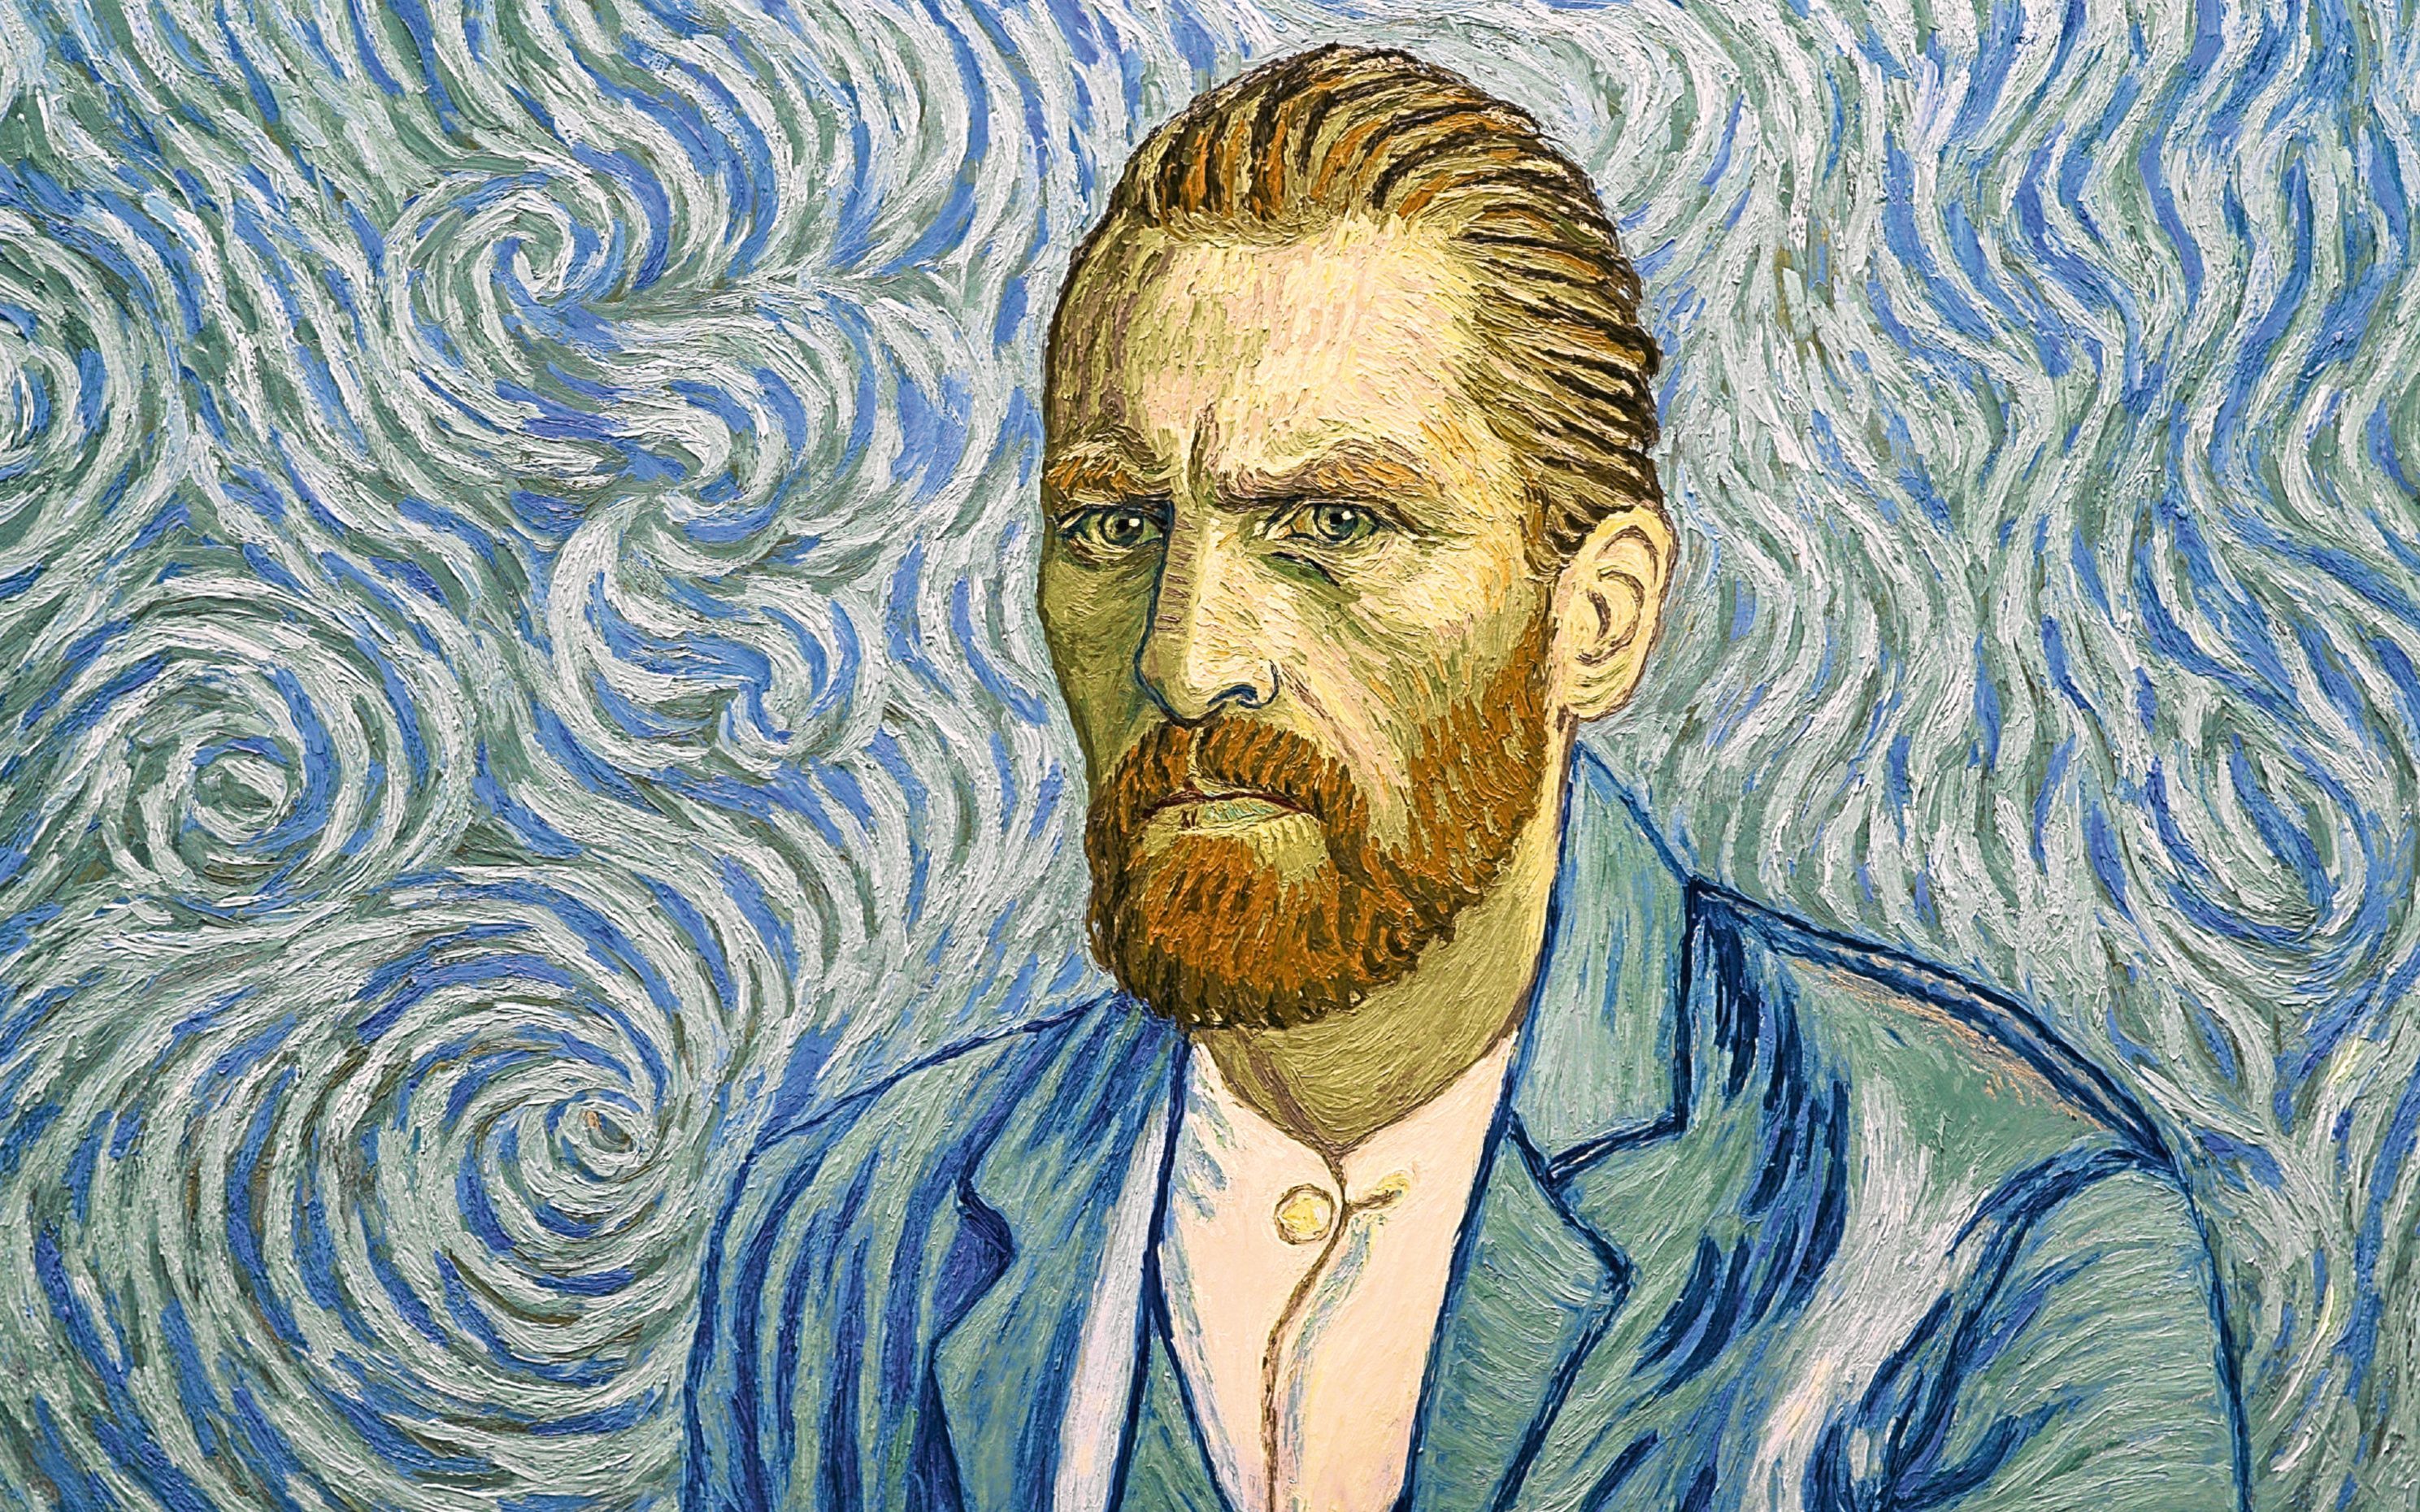 Robert Gulaczyk appears as Vincent van Gogh in Loving Vincent, which uses groundbreaking techniques to create this unique effect on film